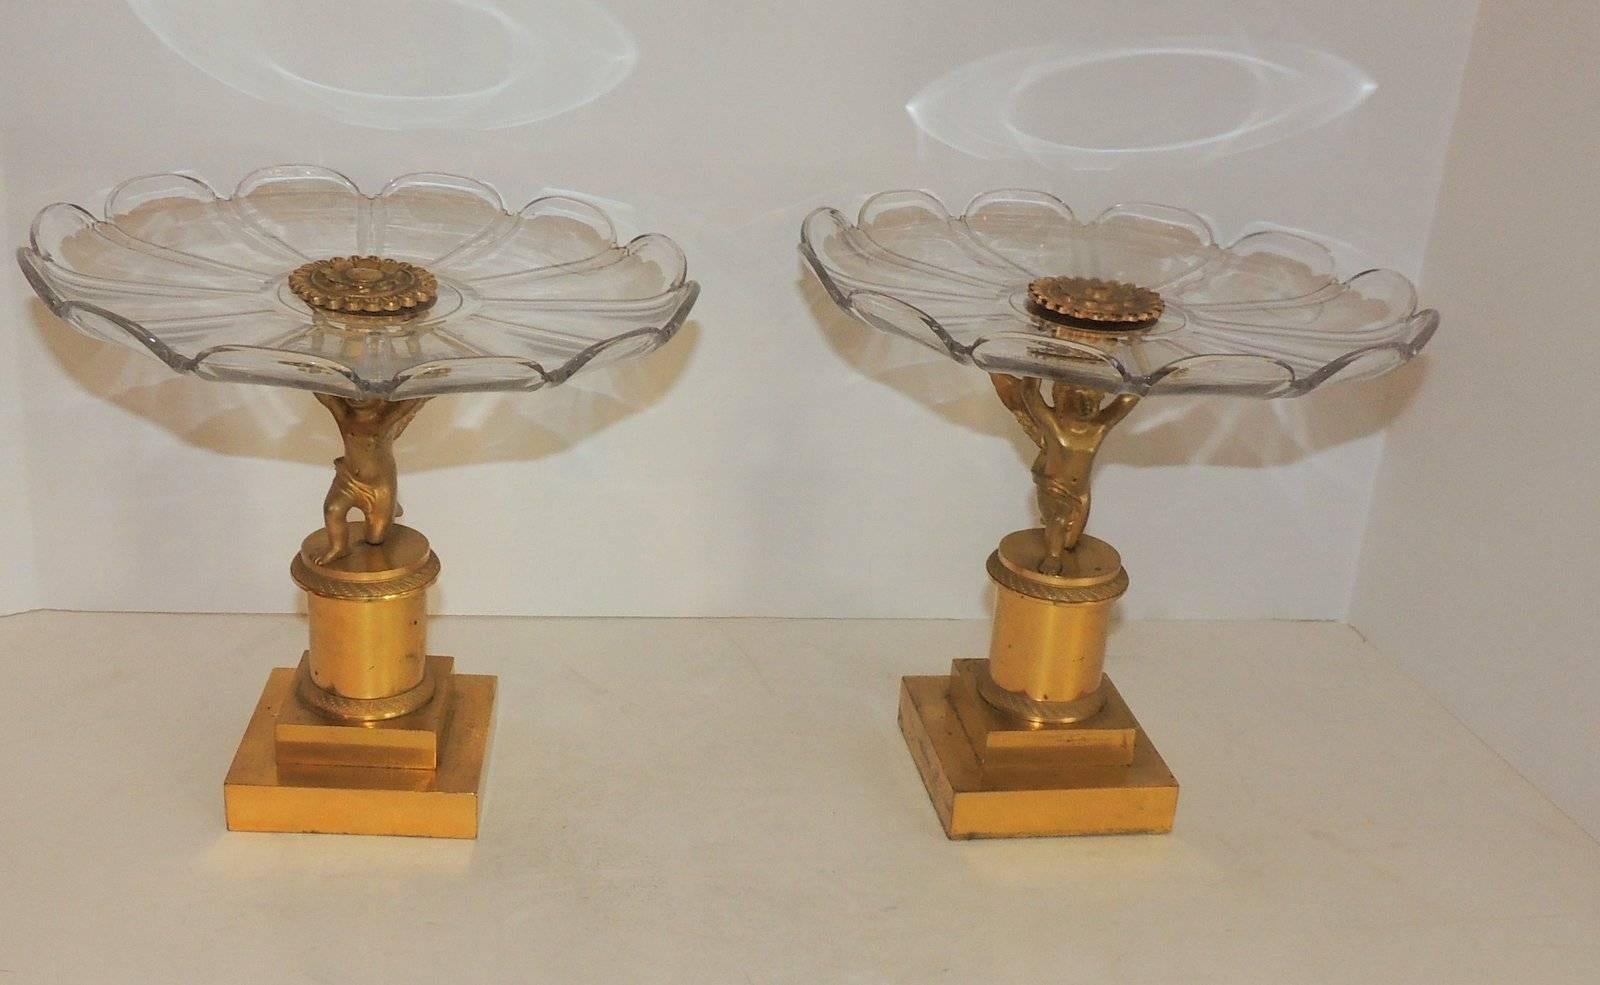 Wonderful pair of crystal scalloped compotes held by gilt bronze winged cherubs putti on etched pedestal stands.

Measures: 9